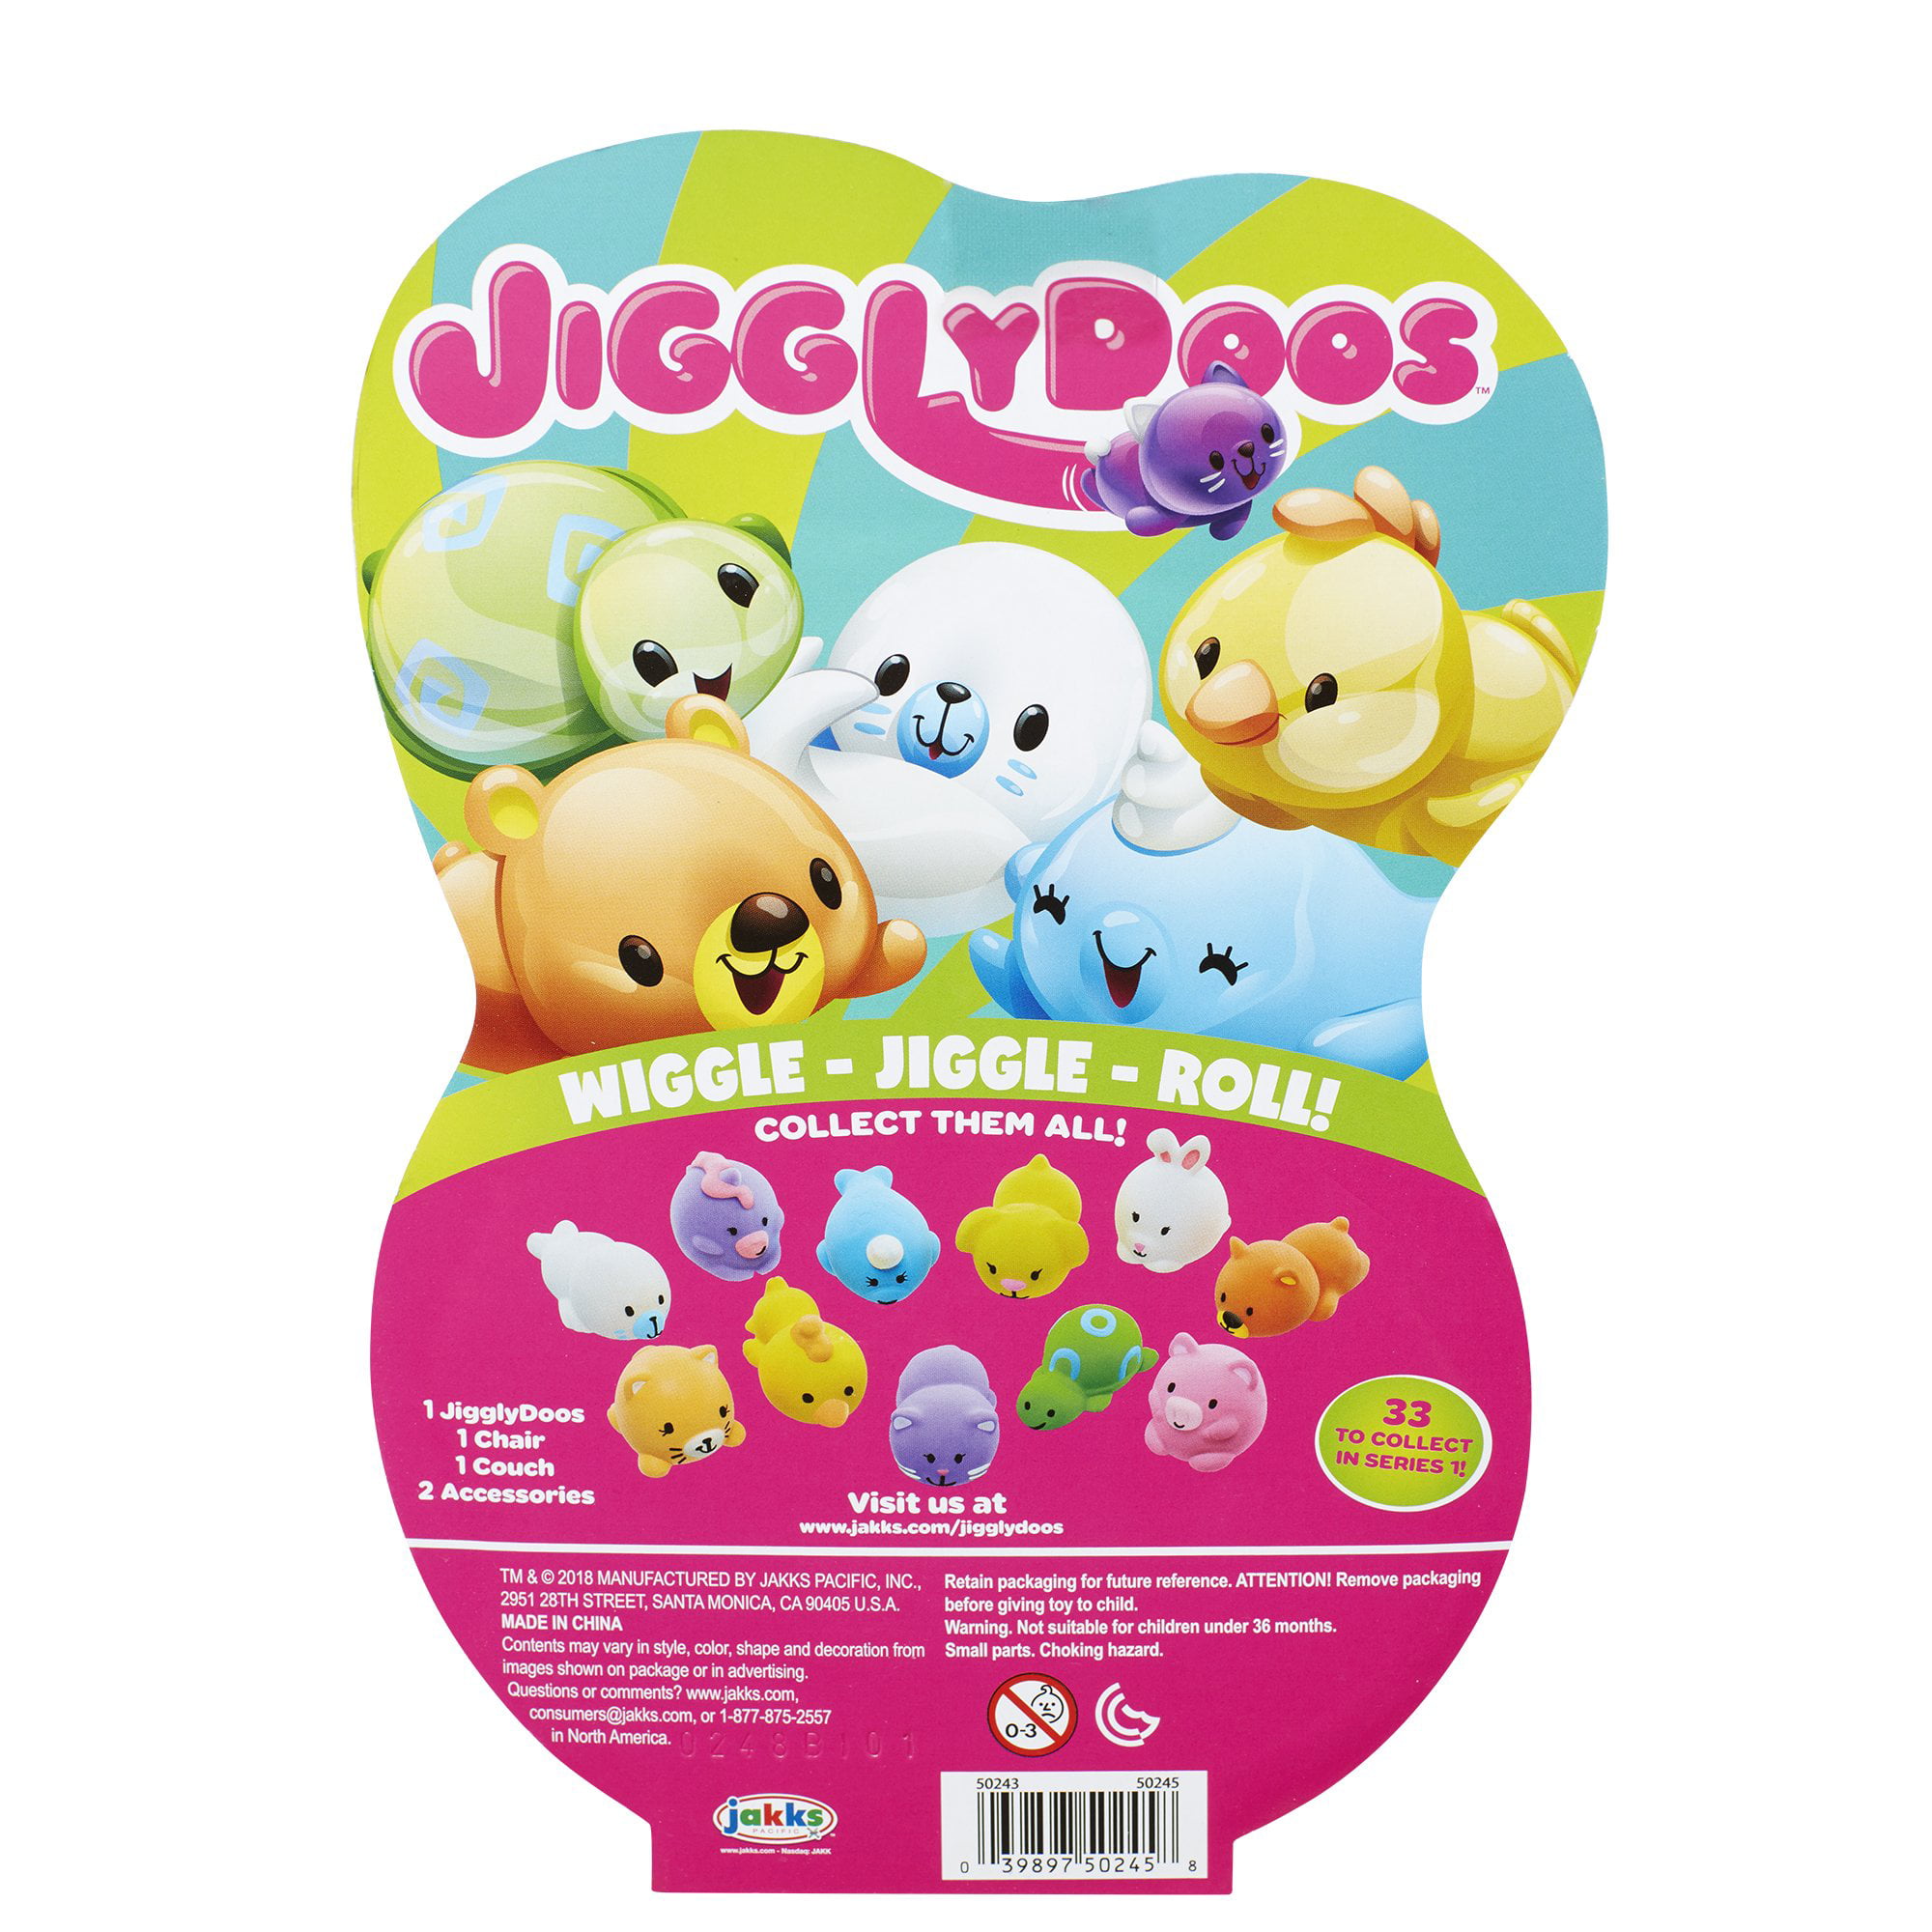 JIGGLYDOOS ~ Lounge Set Furniture Chair Couch Wiggle Jiggle Roll Toy 